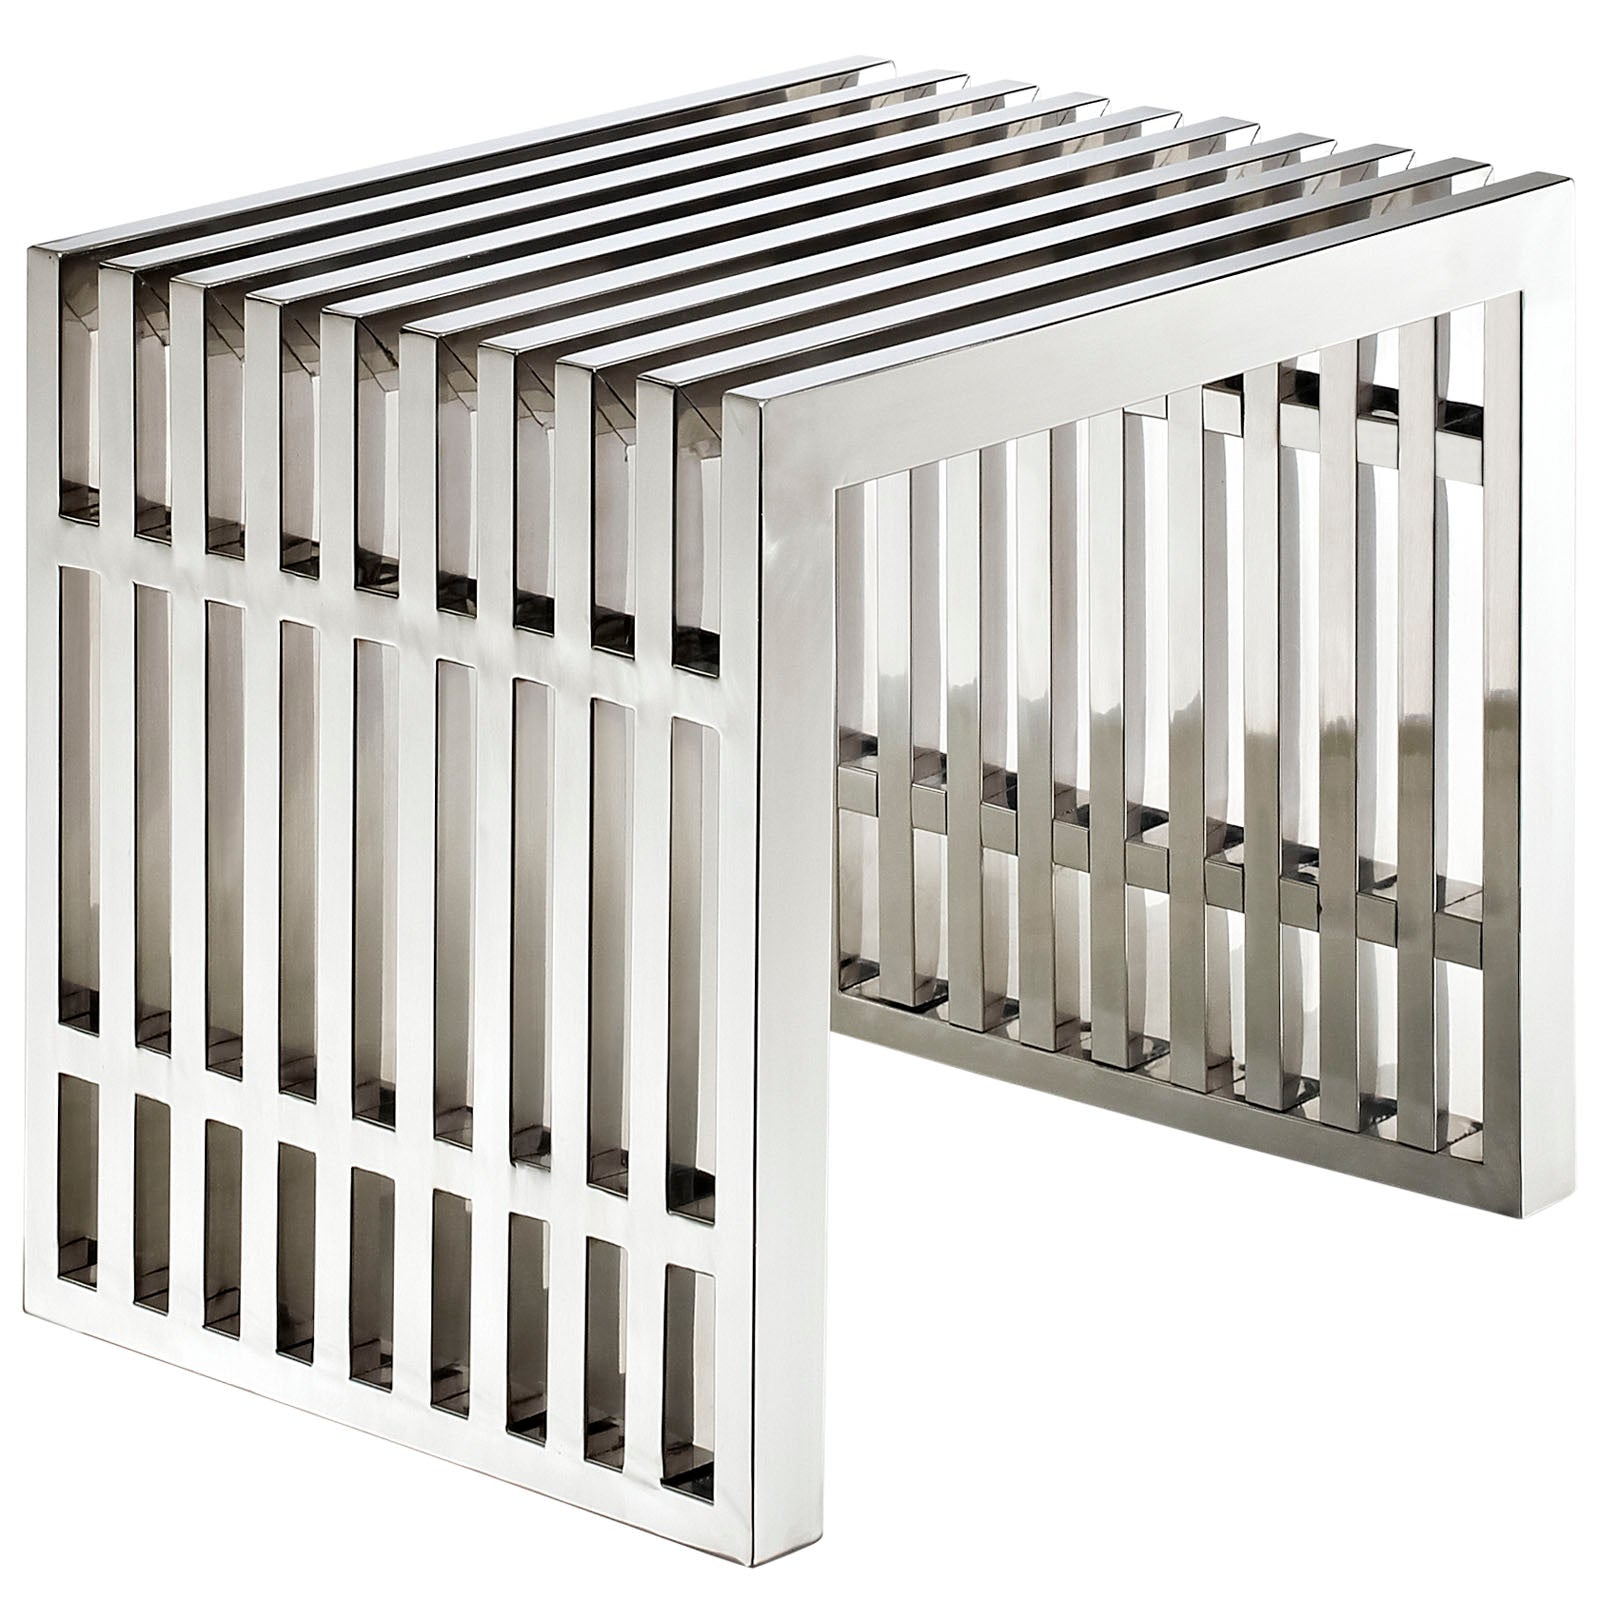 Gridiron Small Stainless Steel Bench - East Shore Modern Home Furnishings